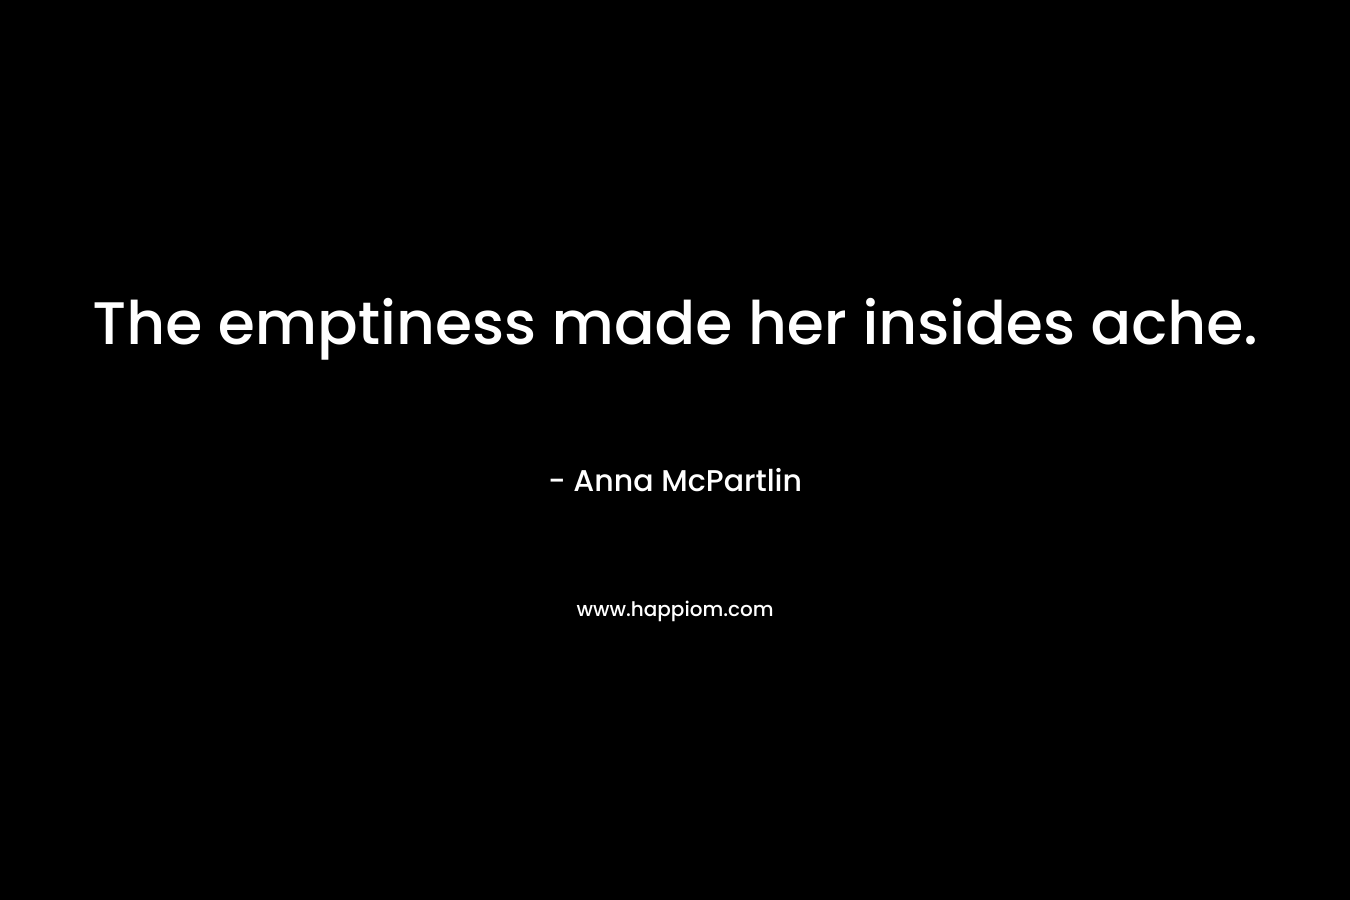 The emptiness made her insides ache.